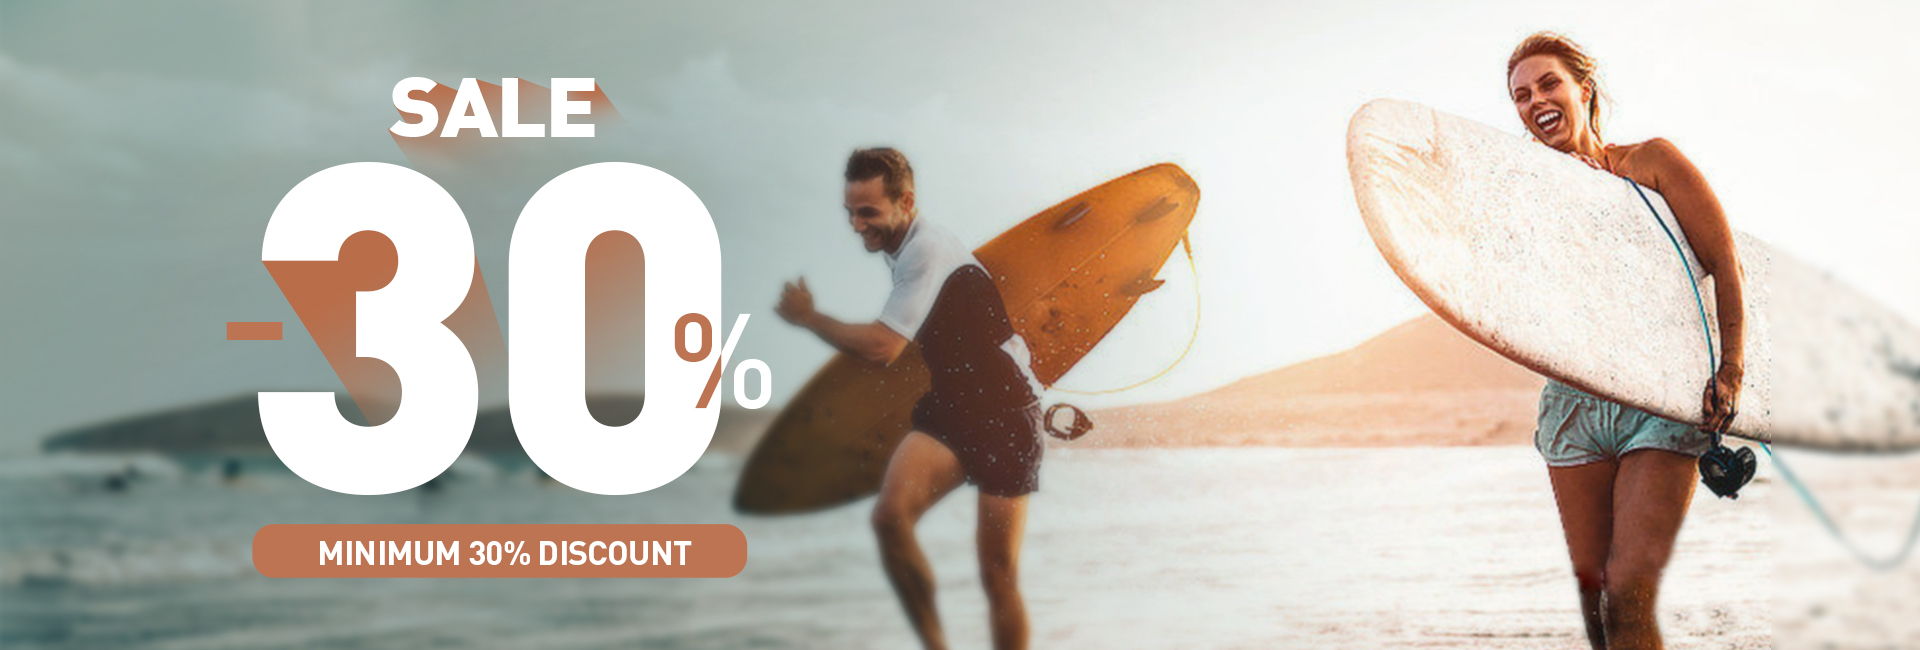 inflatable sup malaking sale